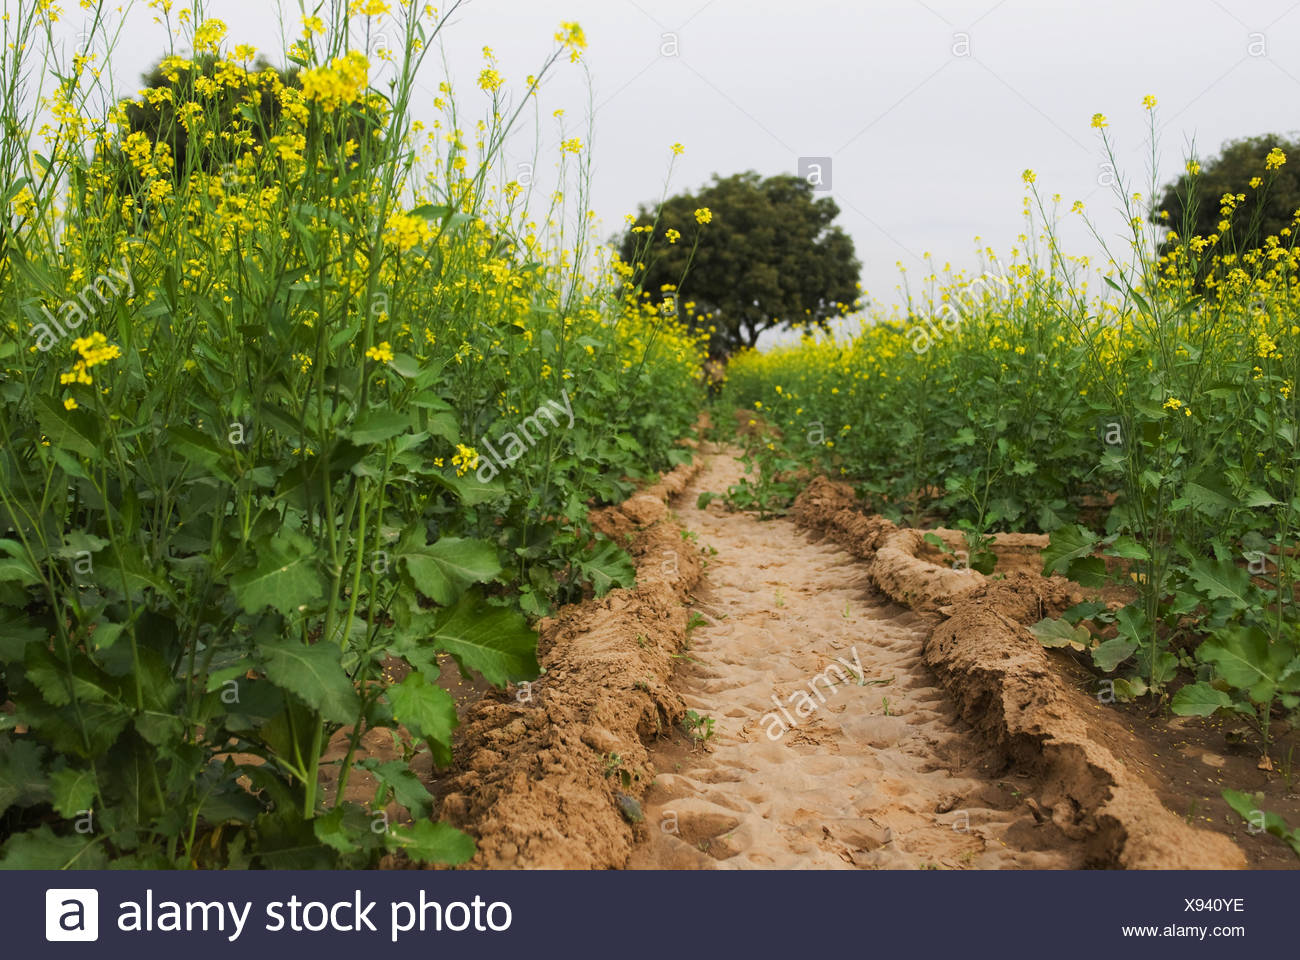 Water Channel For Irrigation Passing Through A Mustard Field